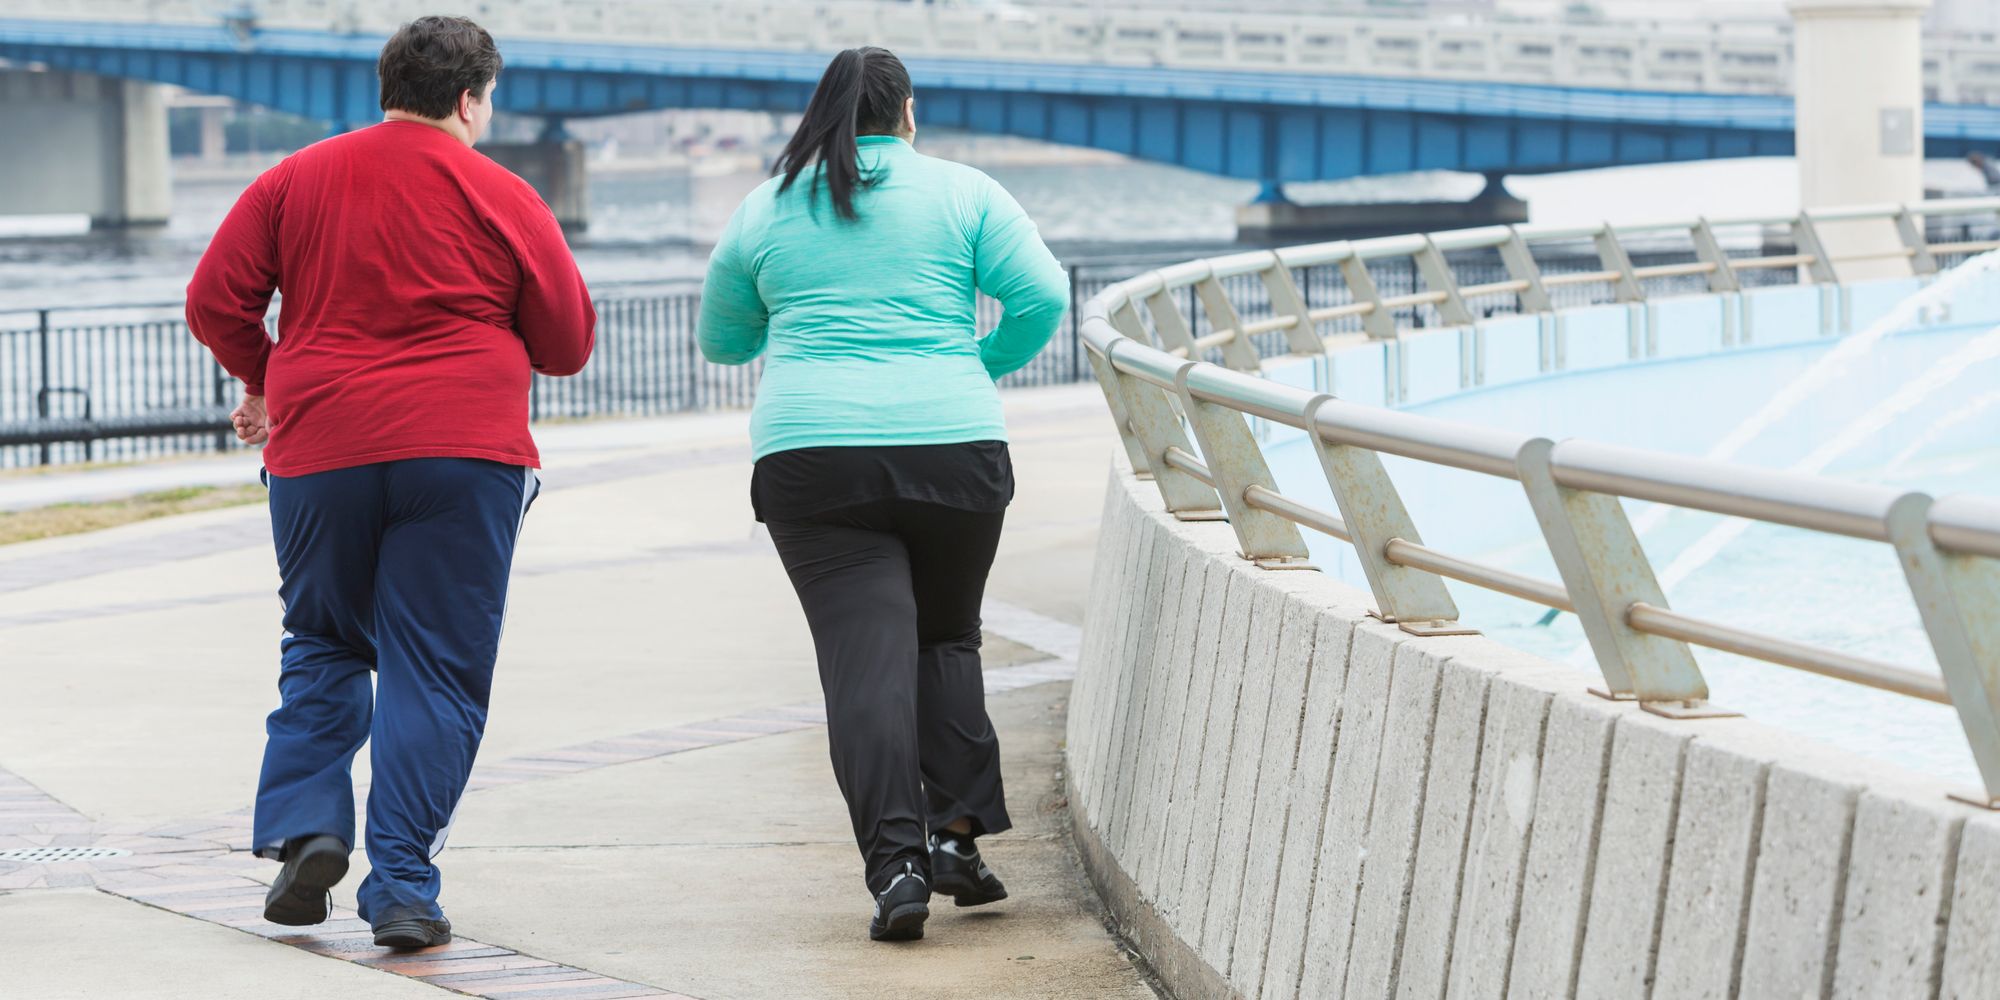 obese overweight struggles suggests